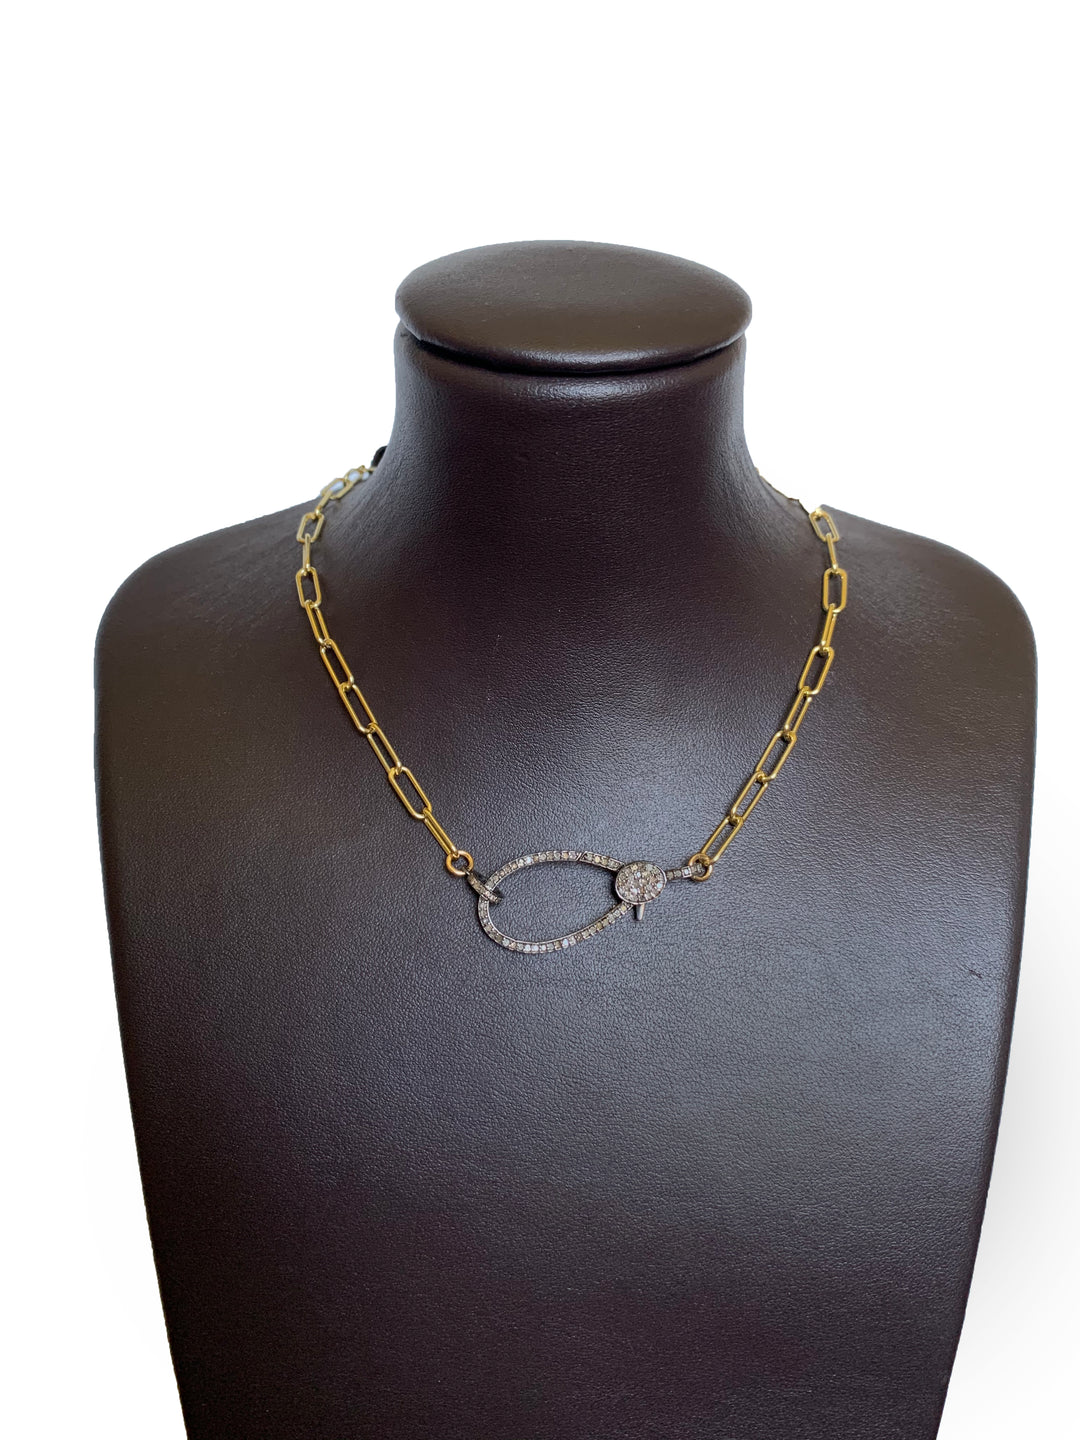 Oversize Clasp On Gold Chain - Kingfisher Road - Online Boutique